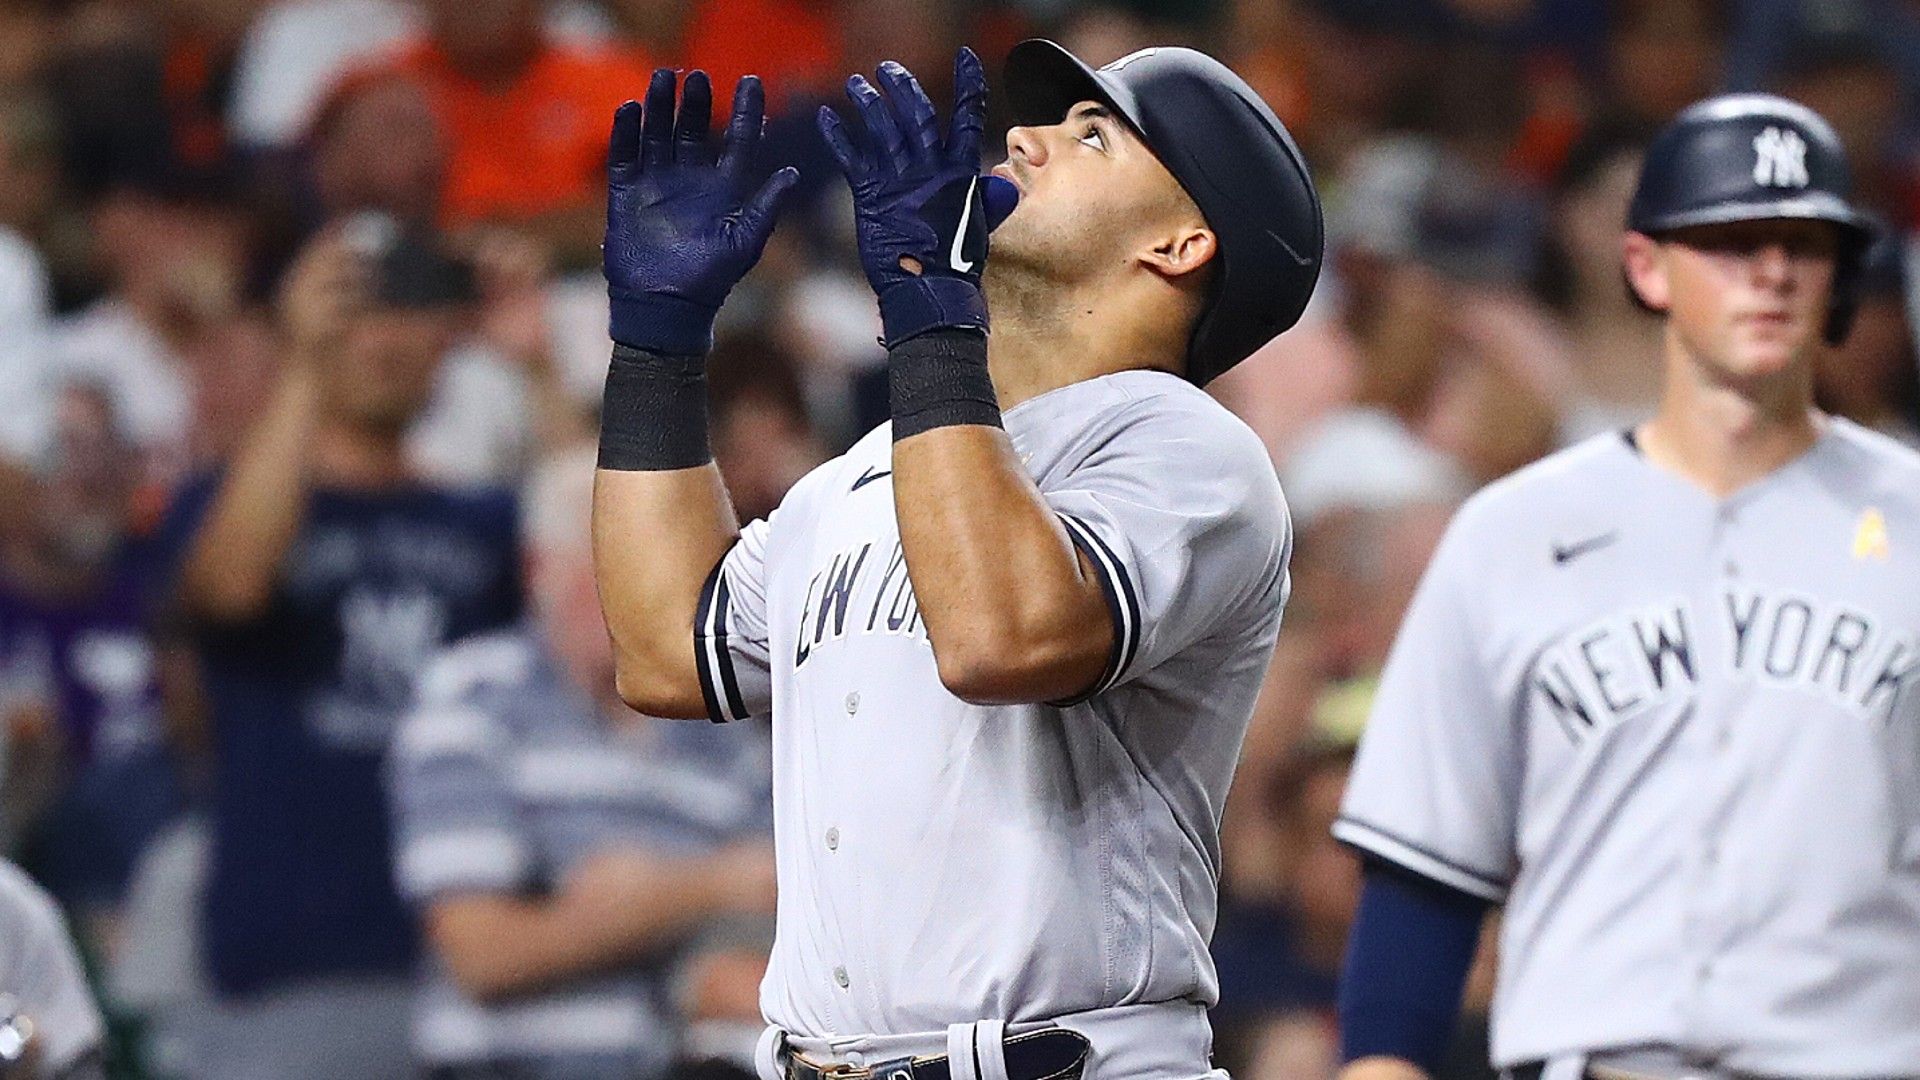 The Yankees shockingly sweep the Astros in MLB